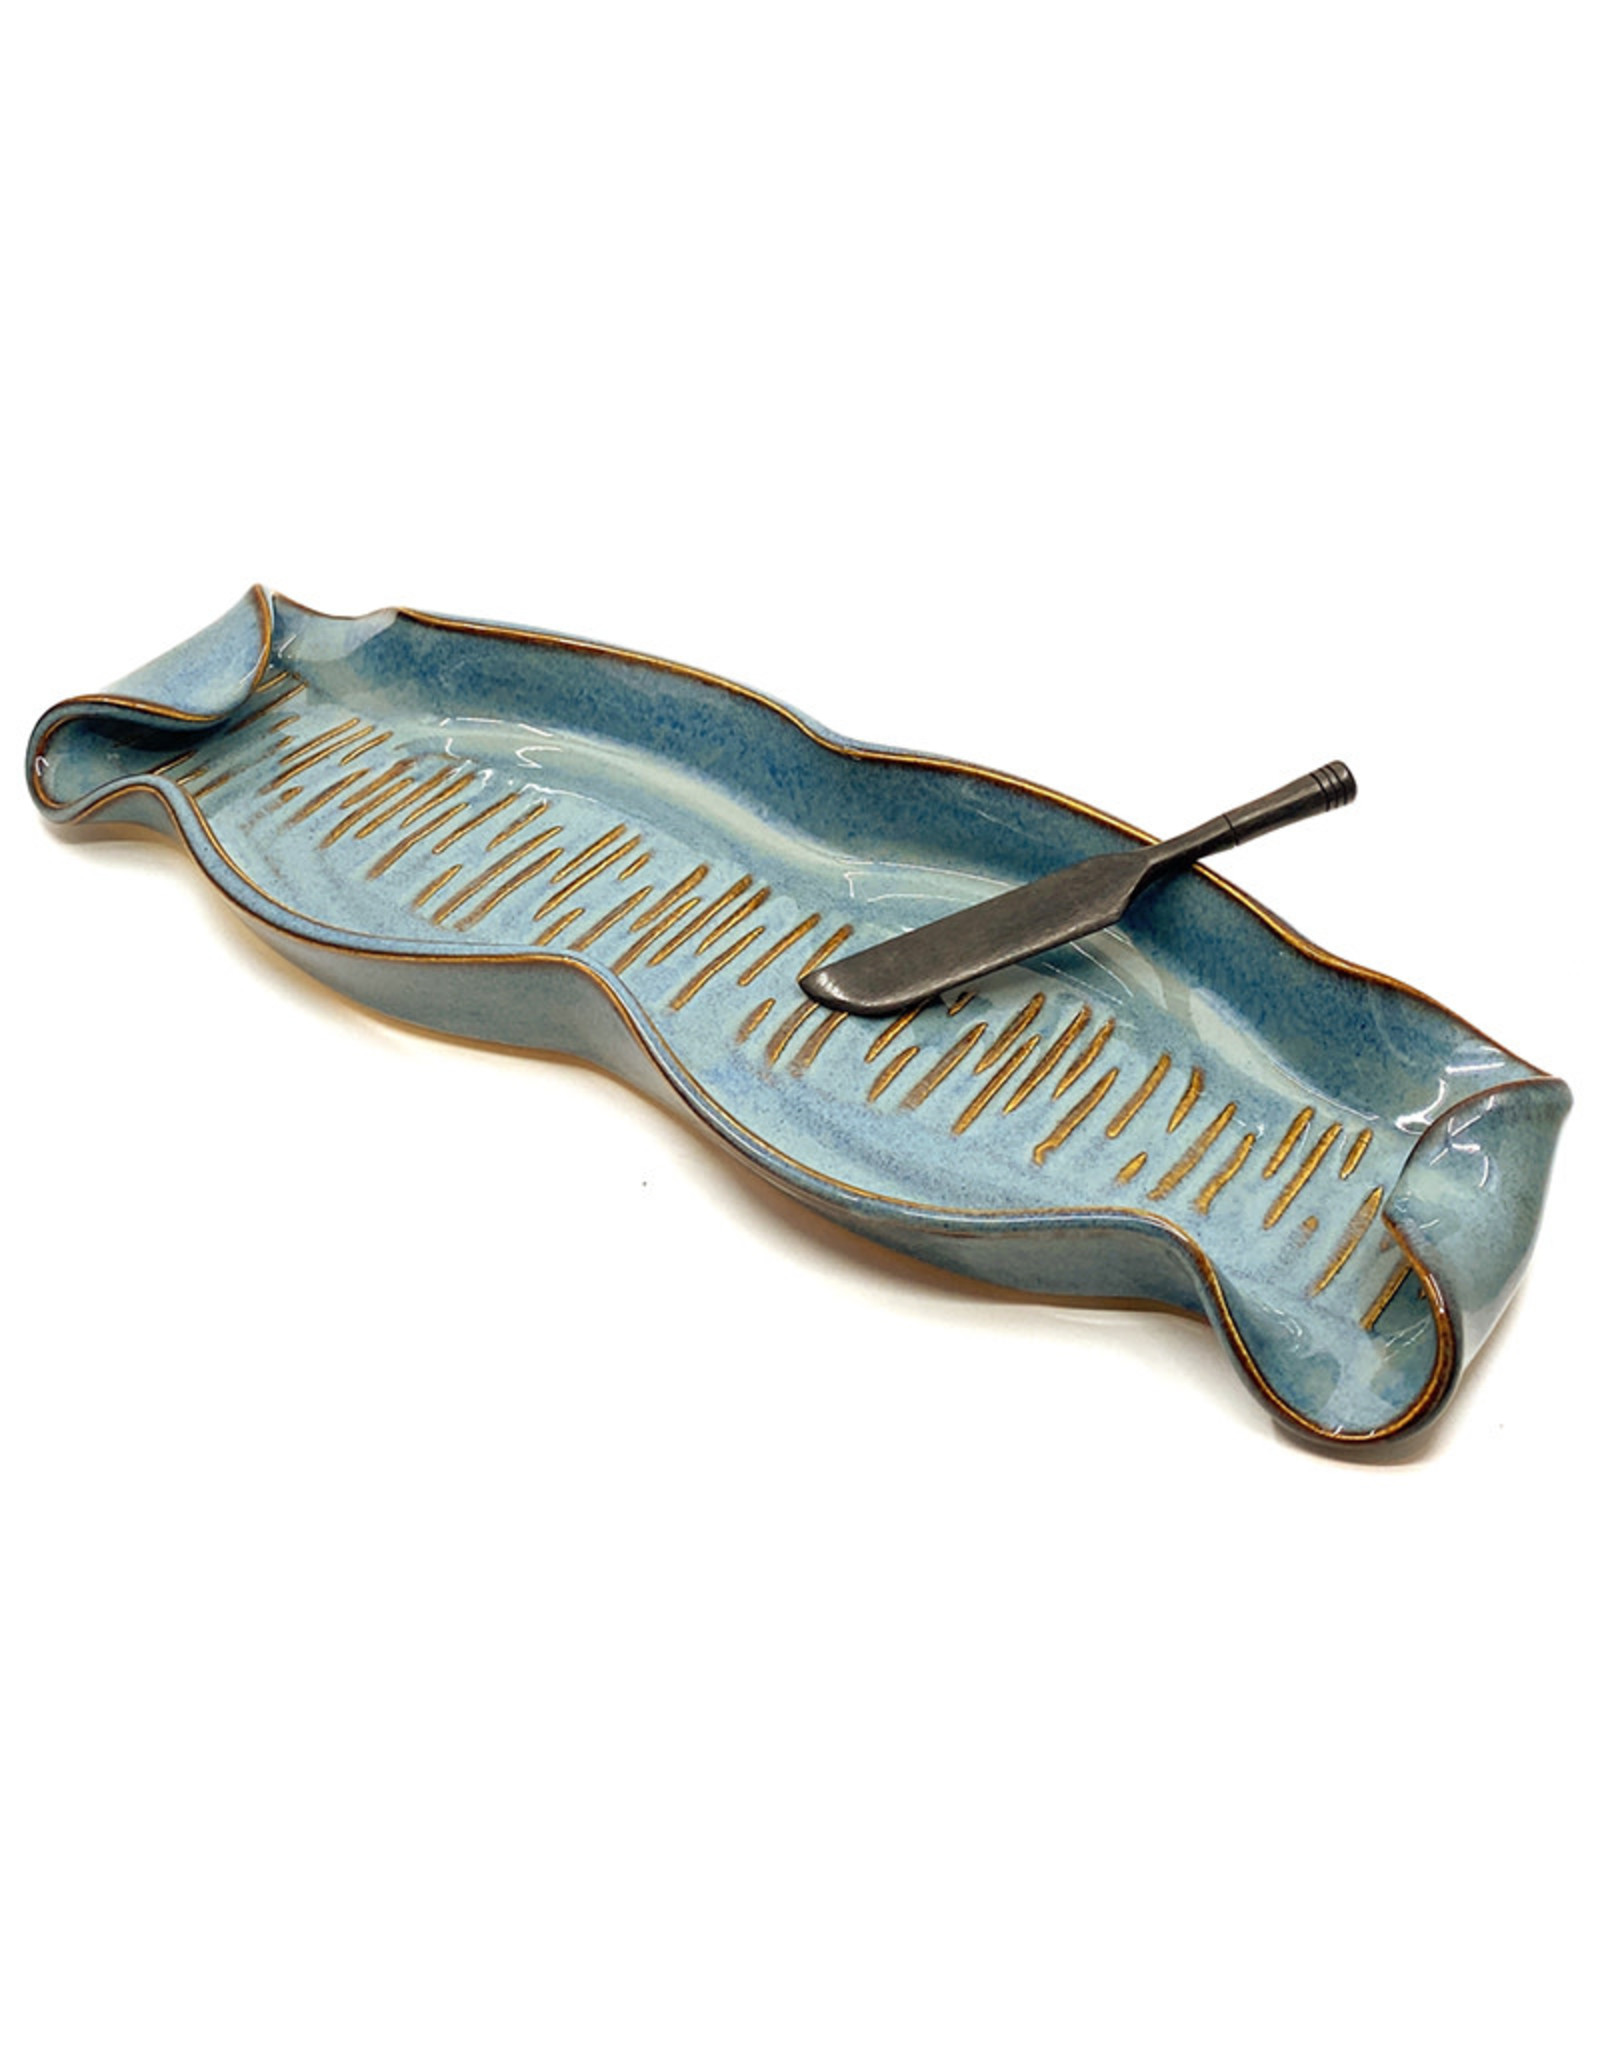 HILBORN POTTERY BLUE MEDLEY BAGUETTE TRAY WITH SPREADER